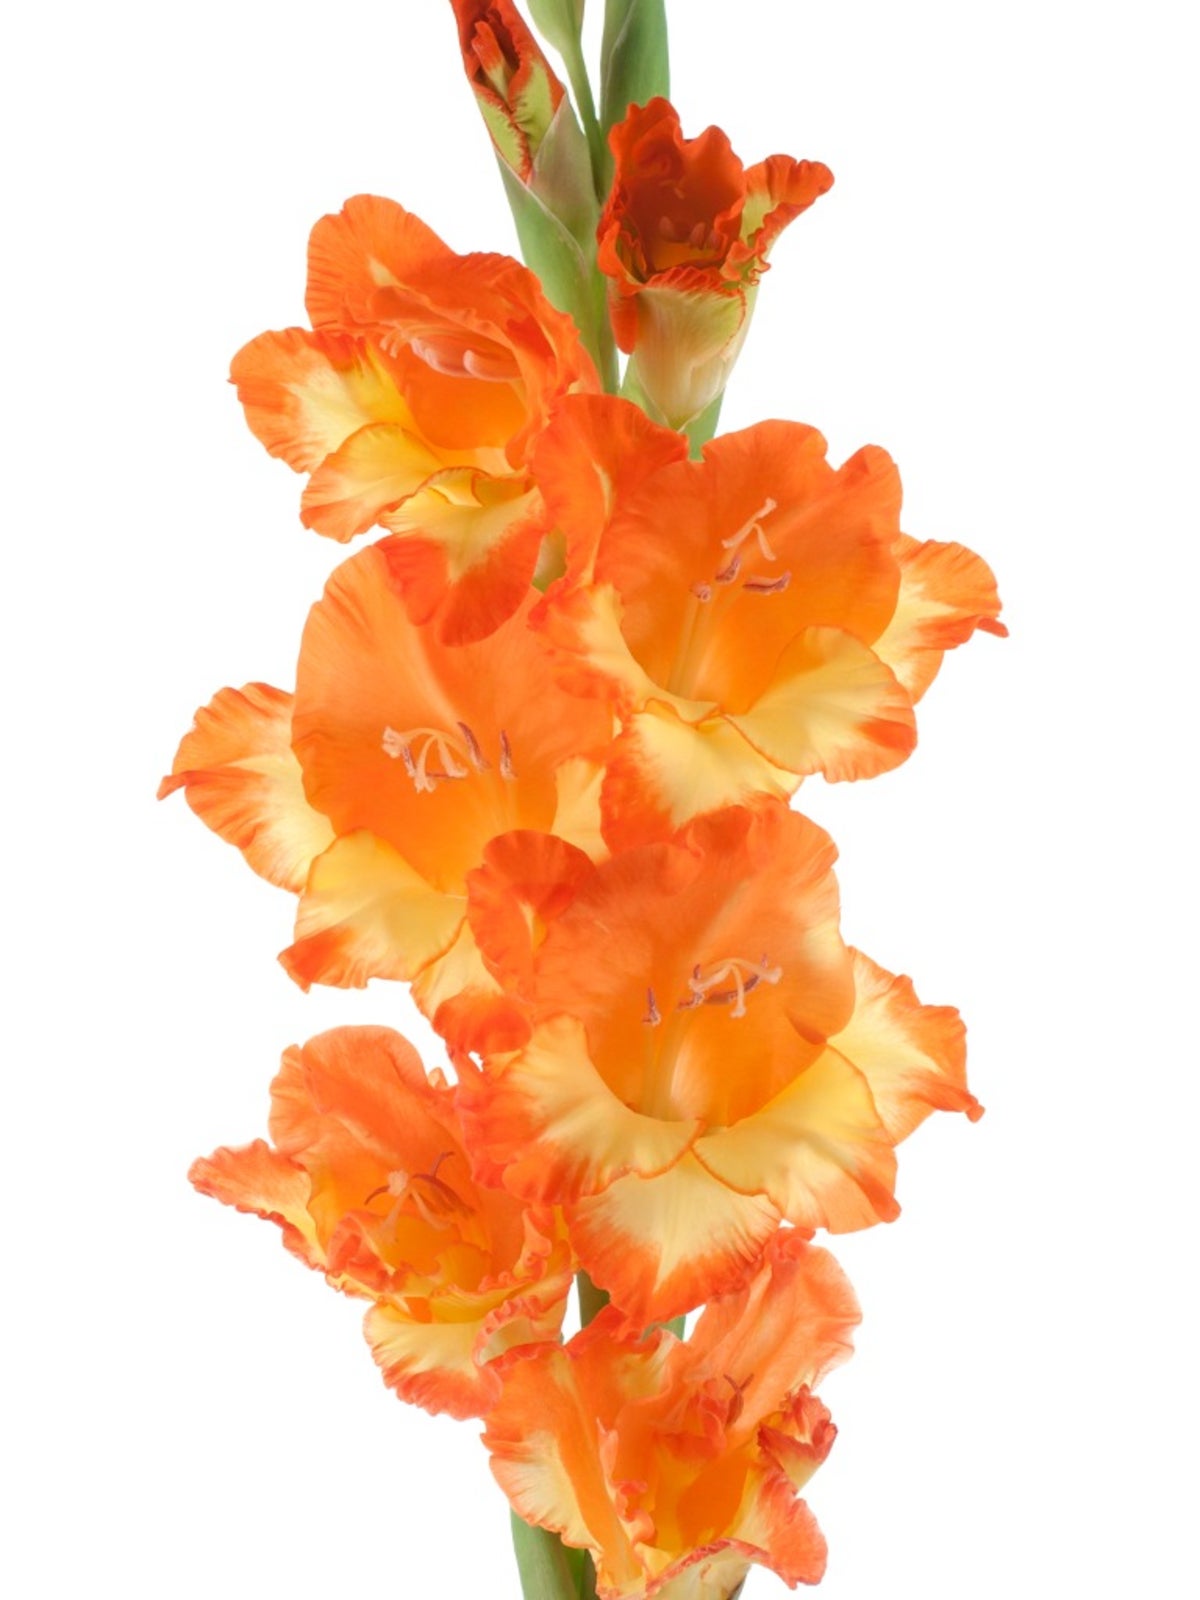 Common Problems With Growing Gladiolus